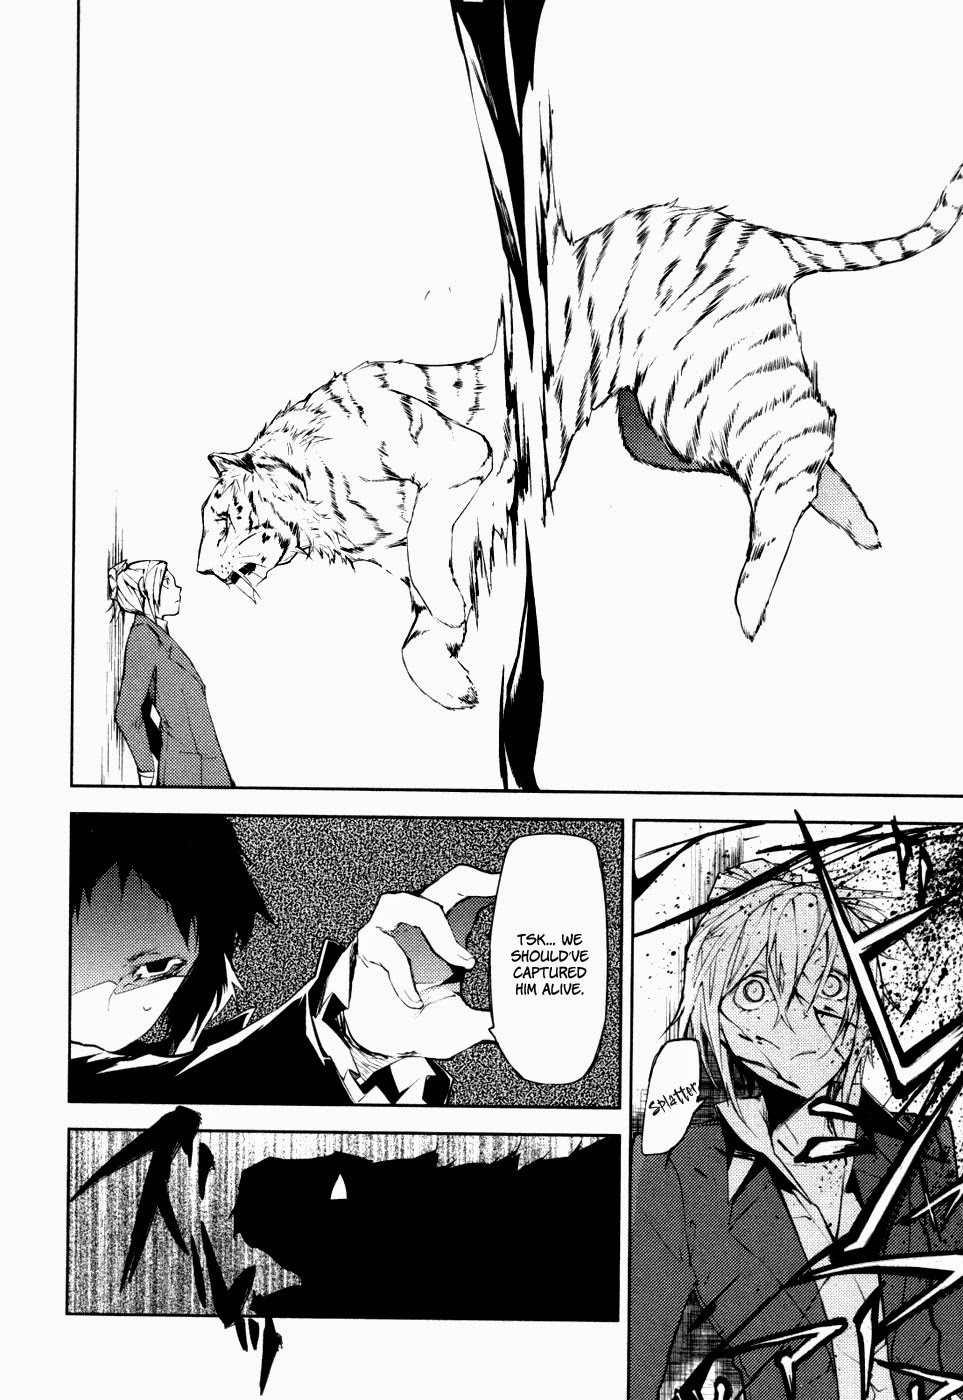 Bungo Stray Dogs chapter 4 page 40